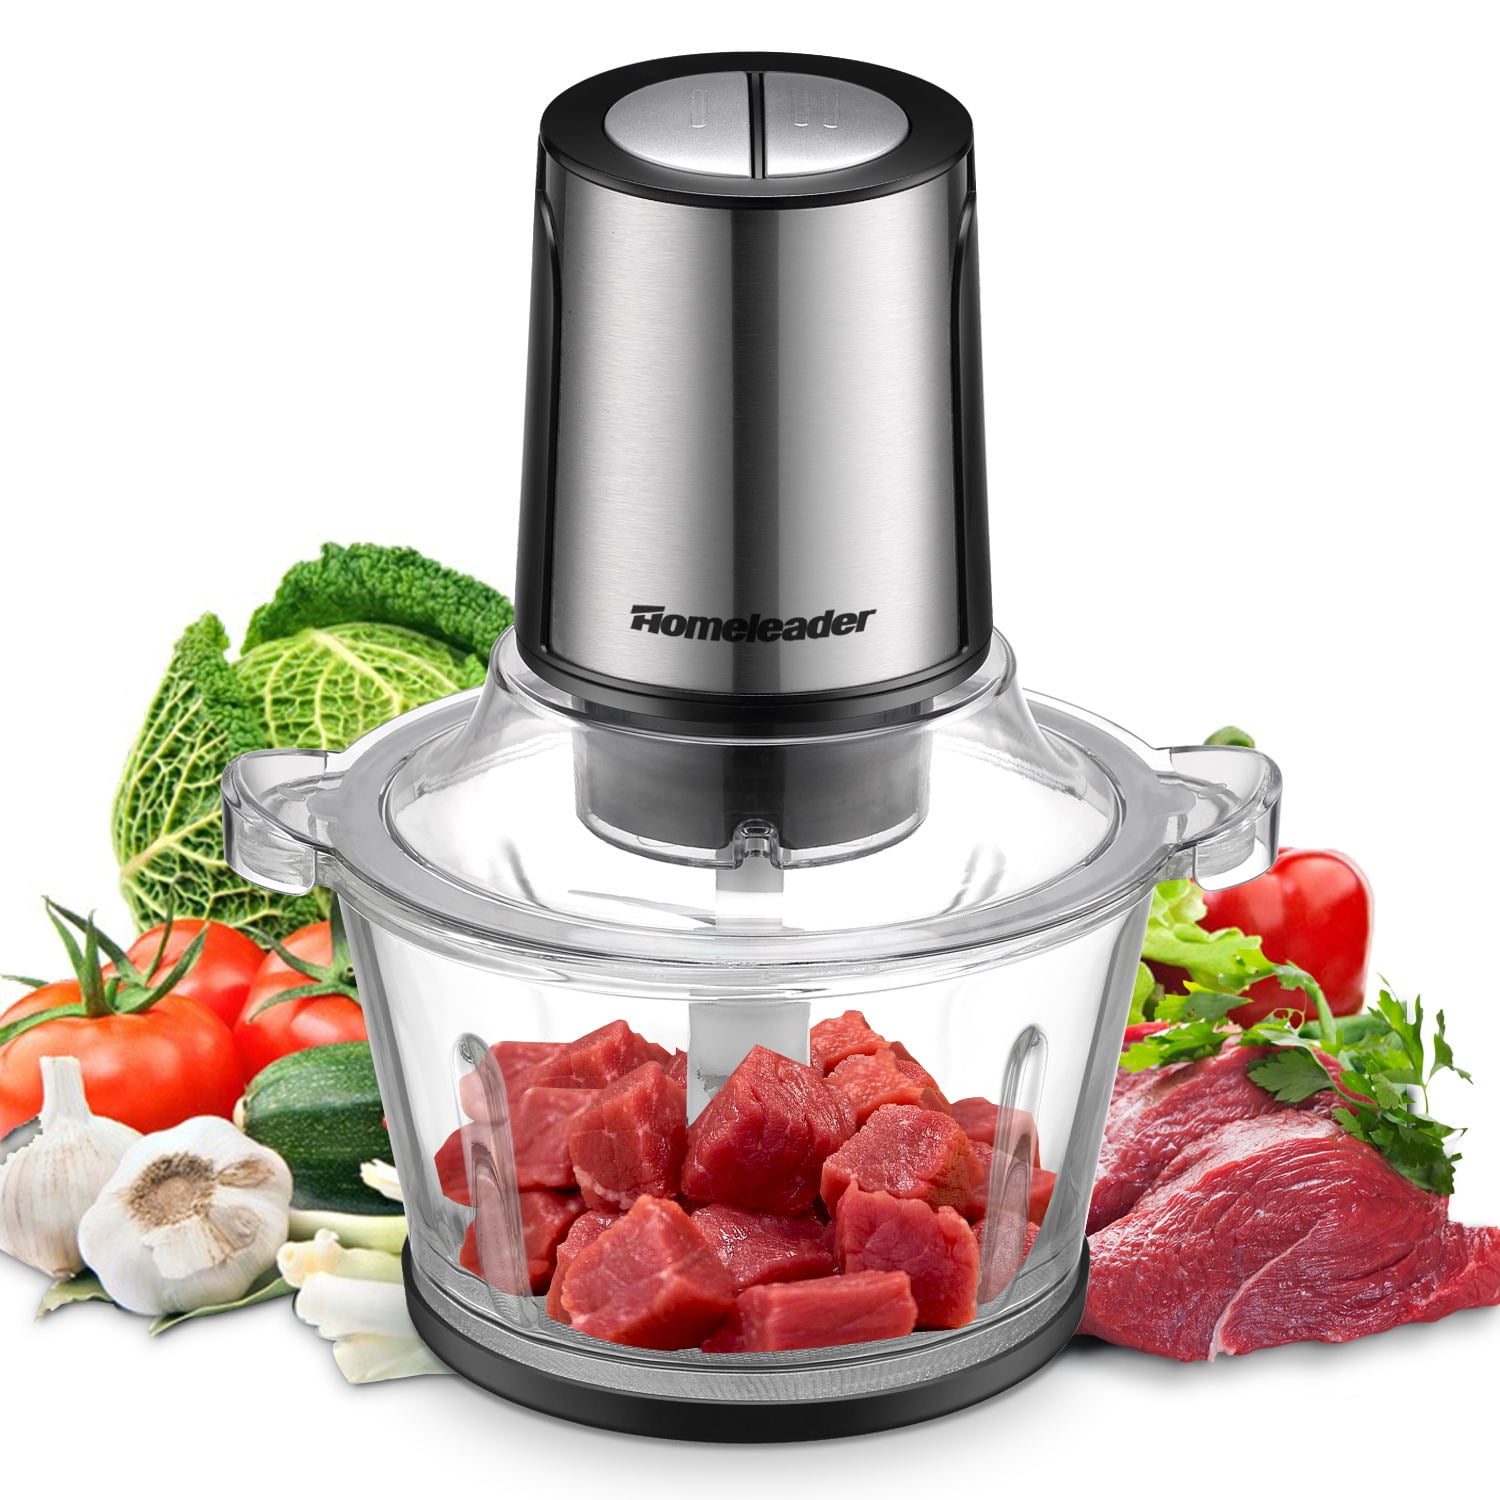 ORFELD Meat Grinder Electric, 8 Cup Stainless Steel Bowl Food Processo